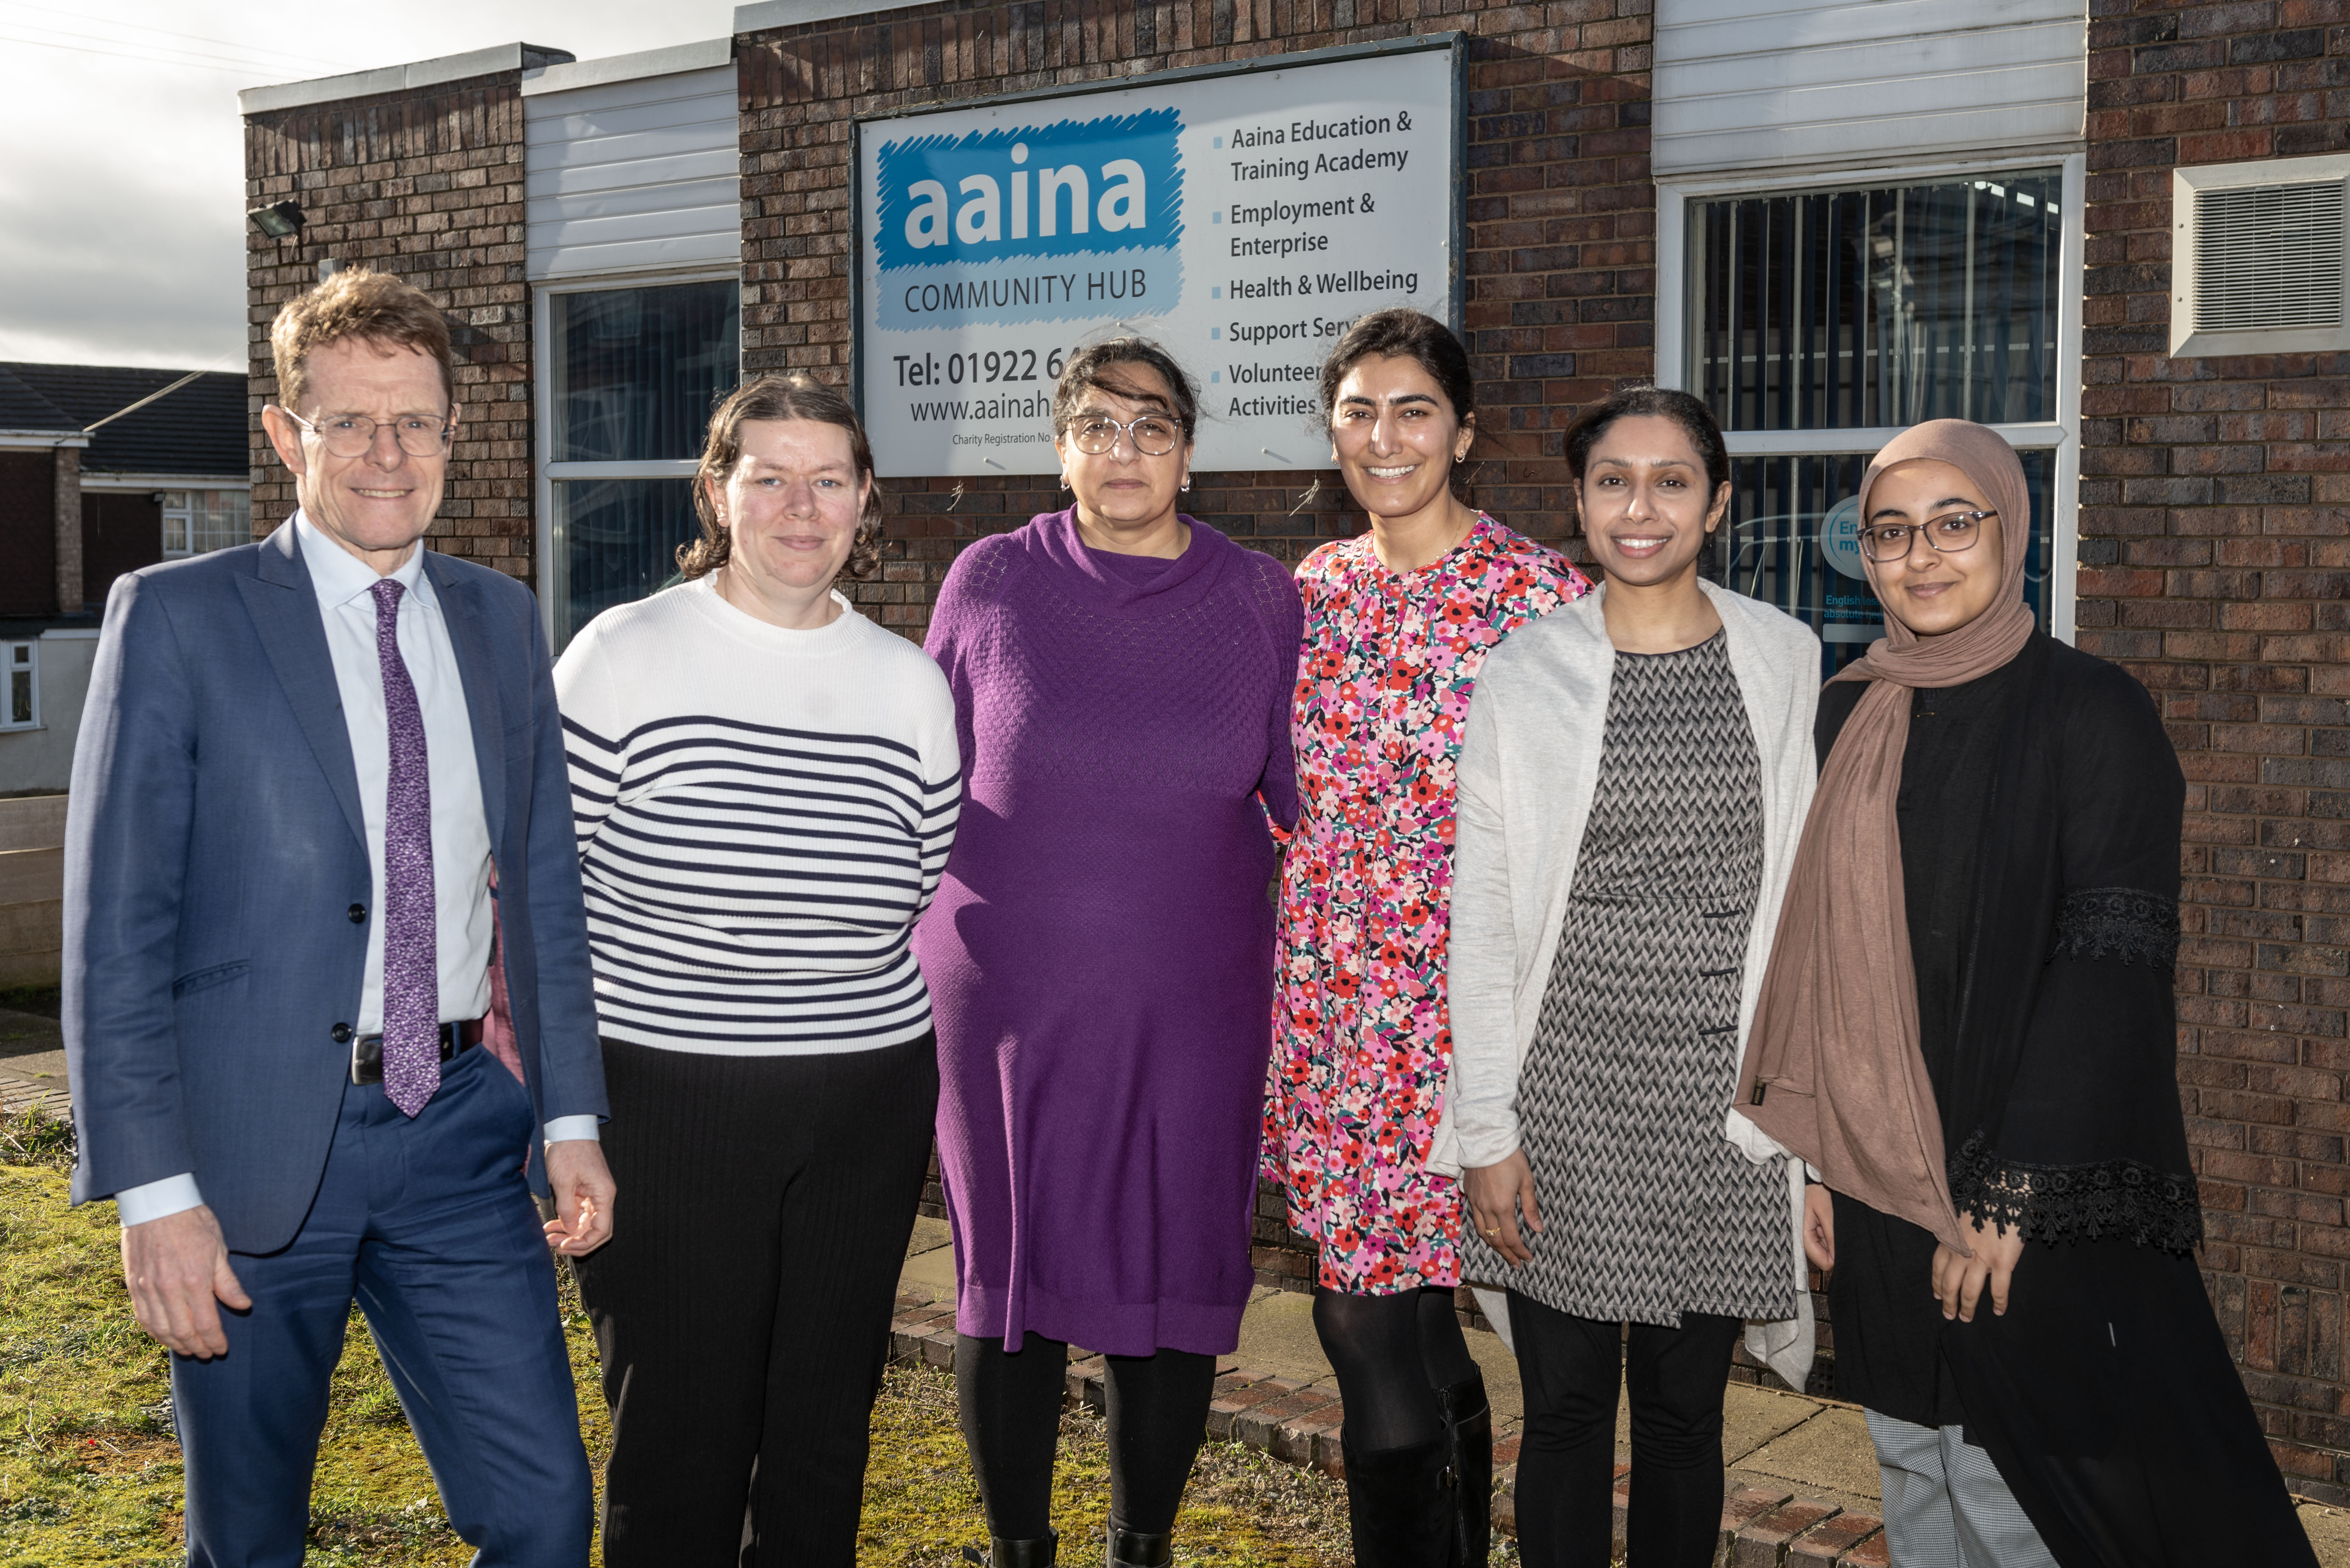 With the Aaina Hub in the background, Andy Street, Mayor of the West Midlands and WMCA chair, Carolyn Dews, A'isha Khan, Aaina Community Hub chief executive, Sharonjit Clare, independent chair of the West Midlands Race Equalities Taskforce, Sharon Khakh and Mahaam Arooj are pictured in the foreground standing in a line and smiling at the camera